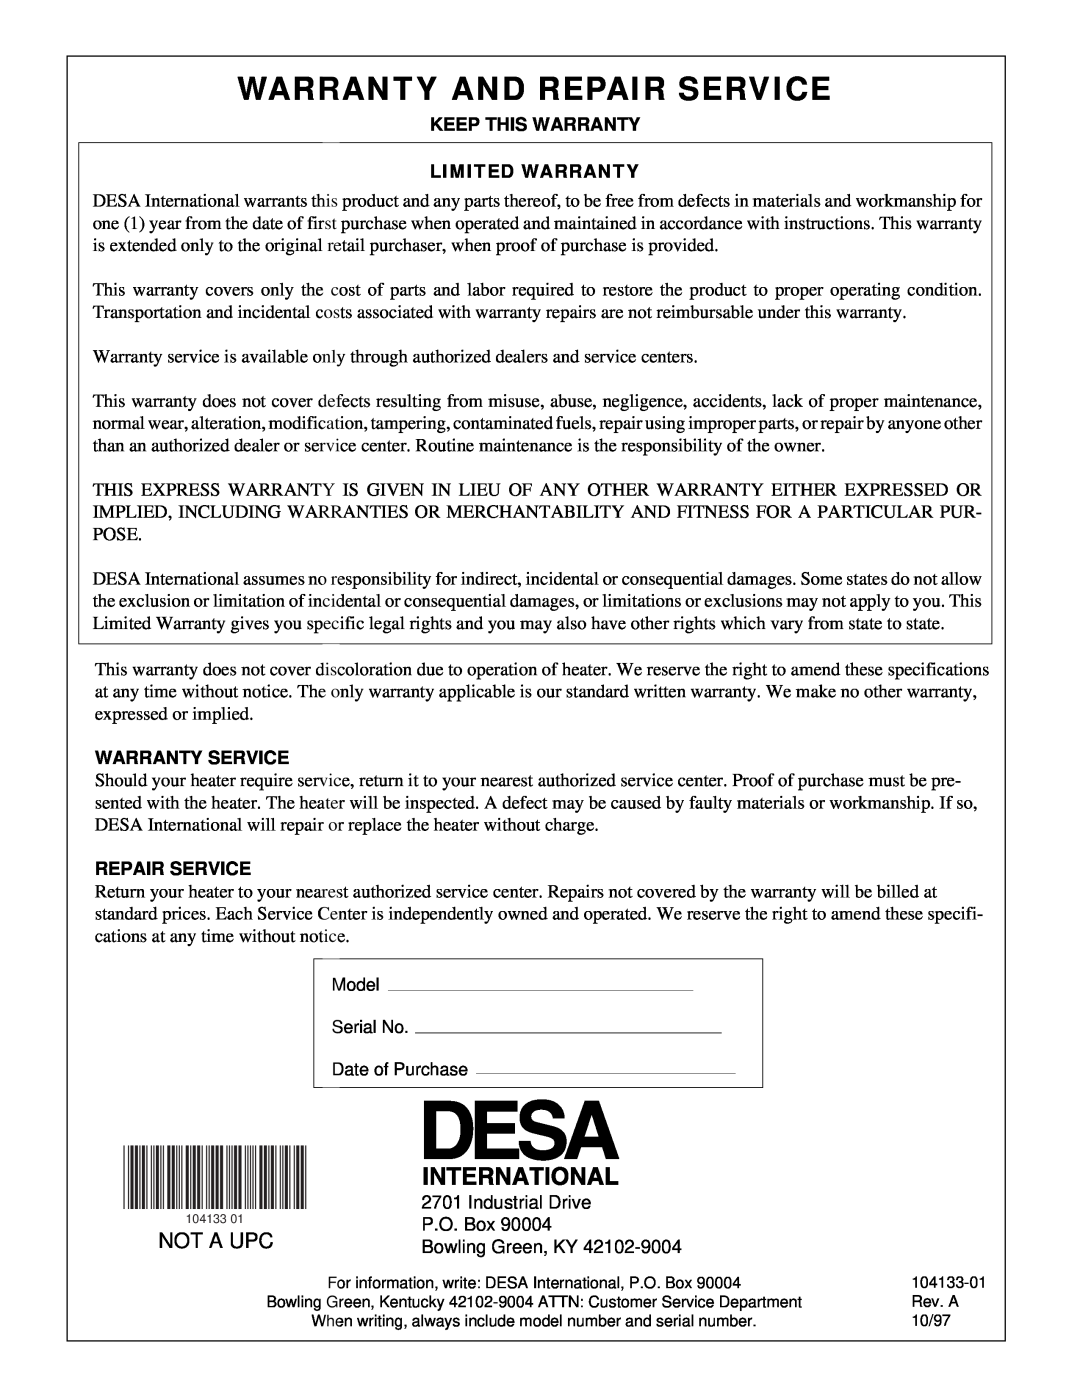 Desa TC250RNG owner manual Warranty And Repair Service, Keep This Warranty Limited Warranty, Warranty Service, Not A Upc 